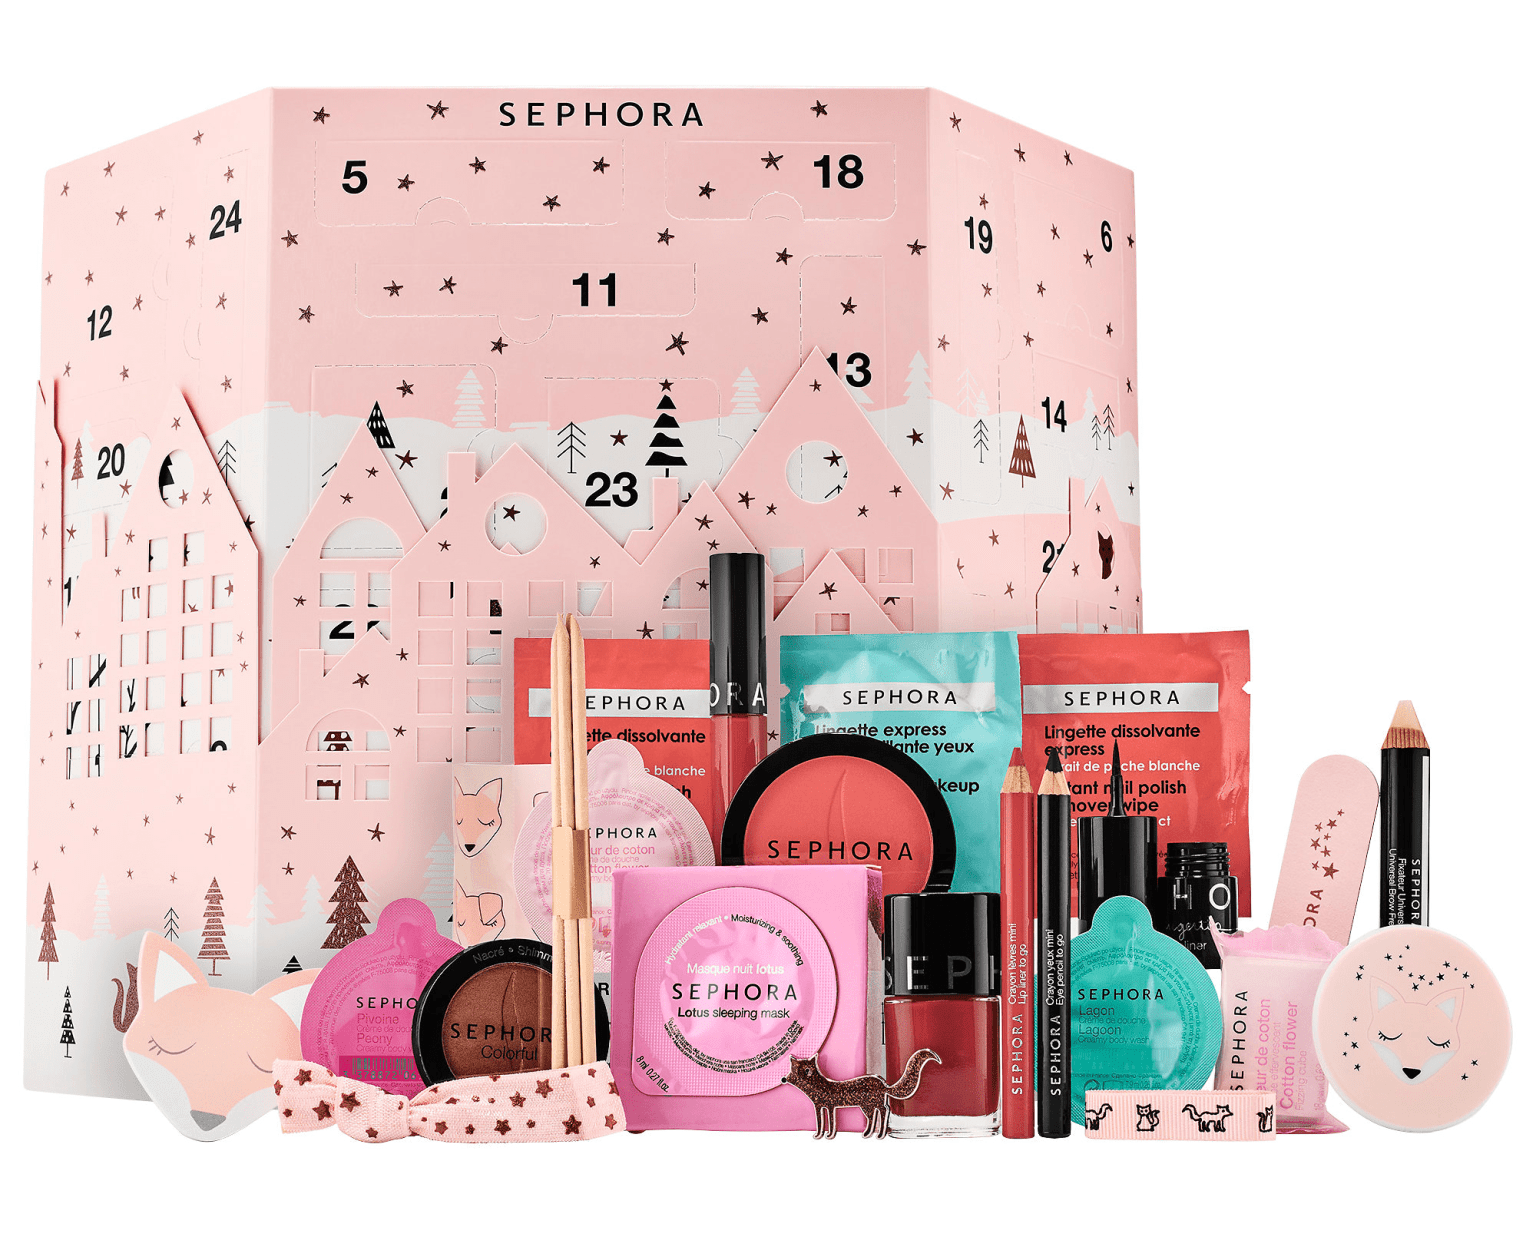 Sephora Advent Calendar Reviews Get All The Details At Hello Subscription!